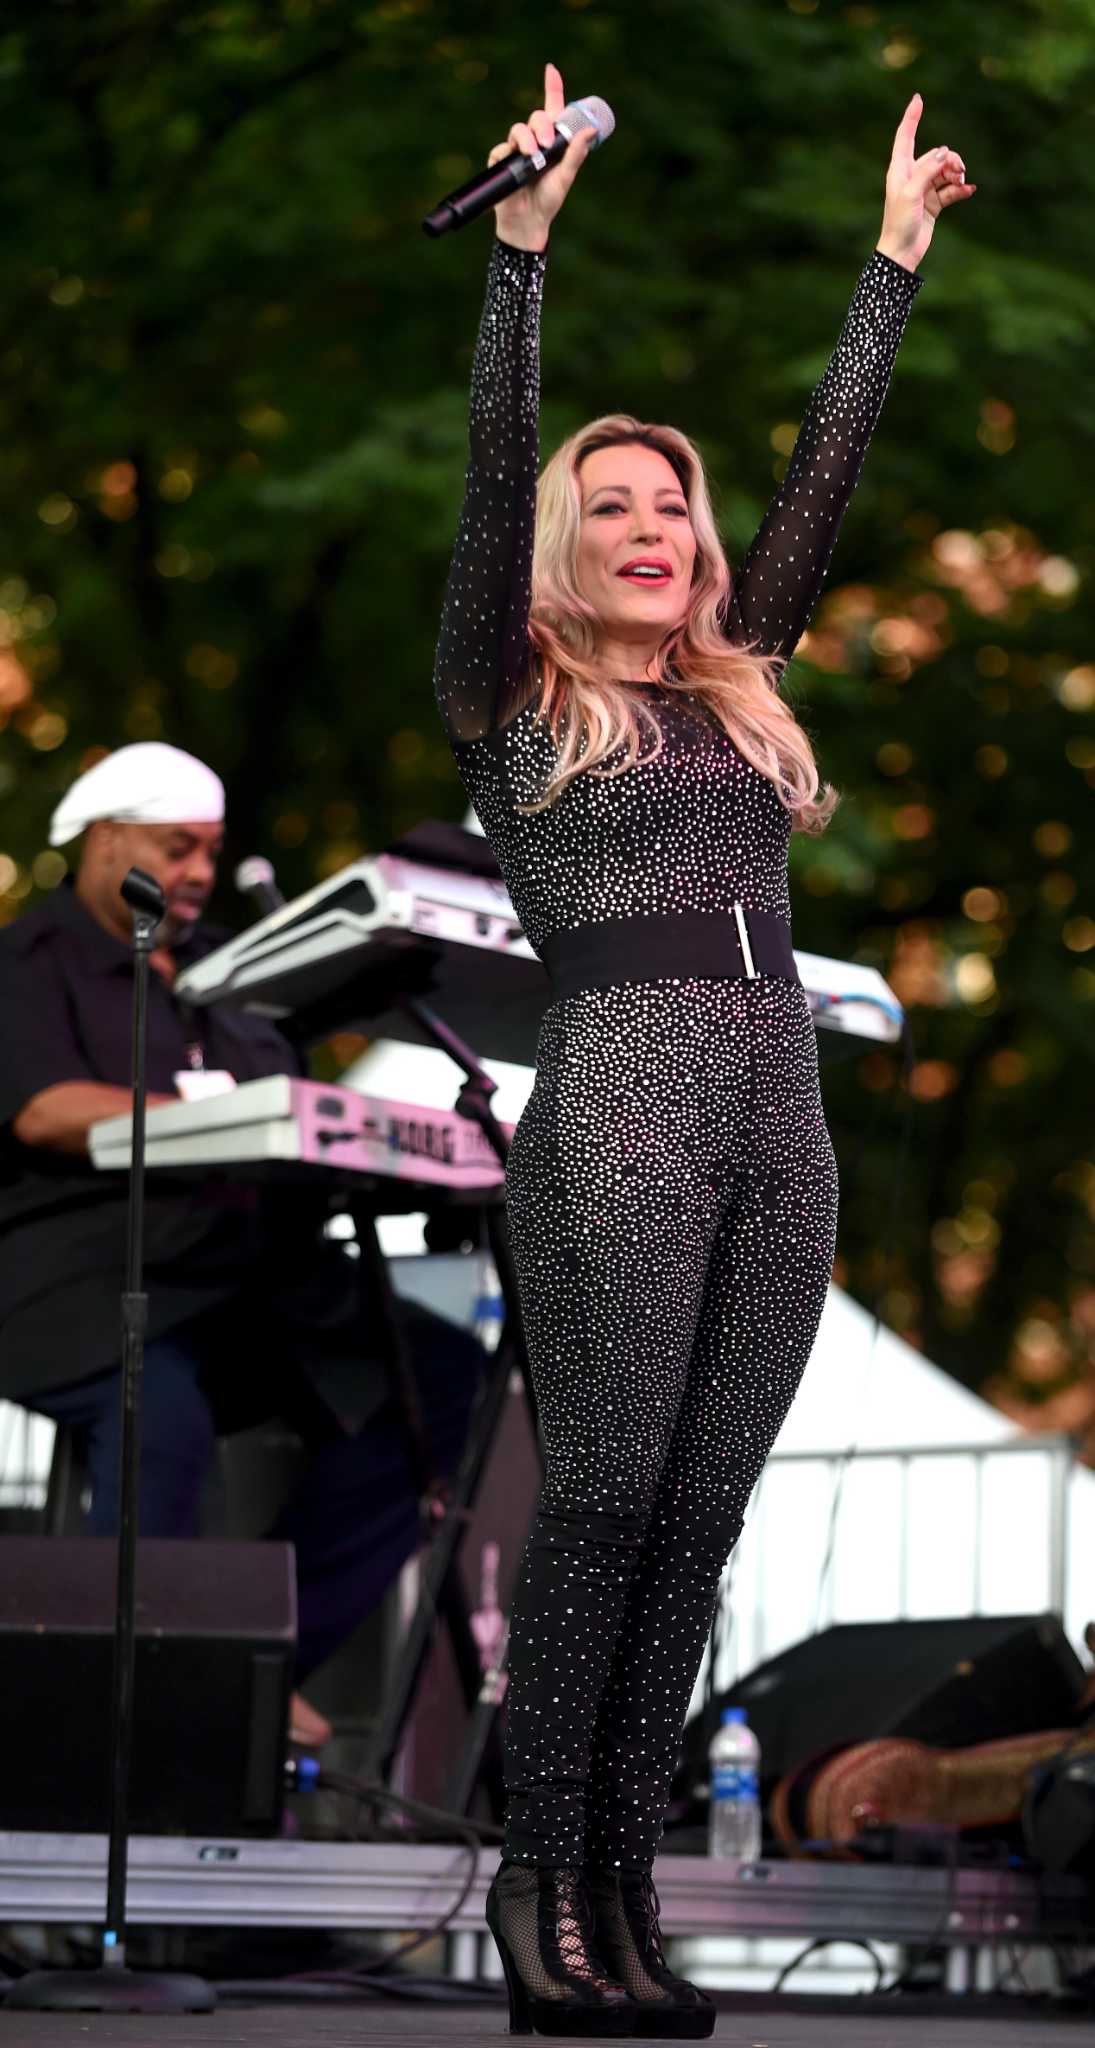 Taylor Dayne Concert on the New Haven Green